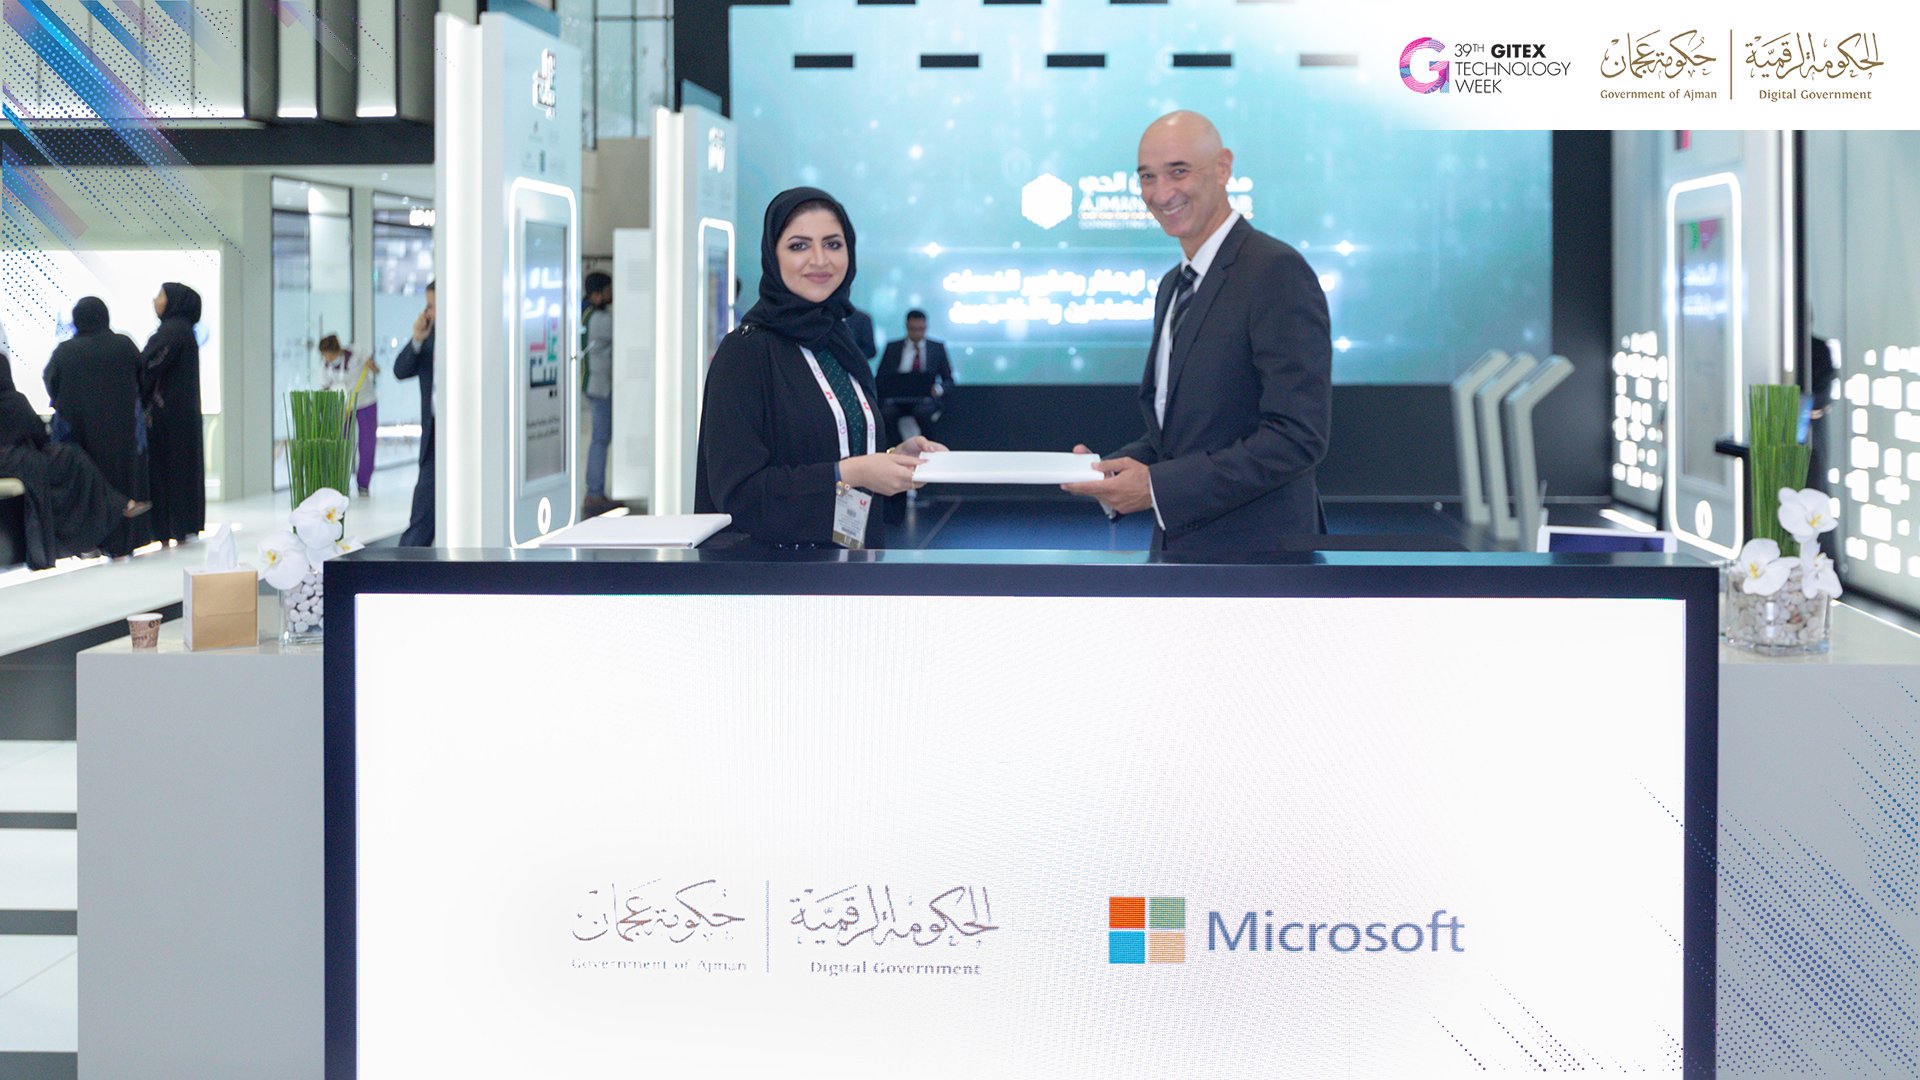 Ajman Digital Government, Microsoft sign MoU to accelerate digital transformation in the Emirate of Ajman